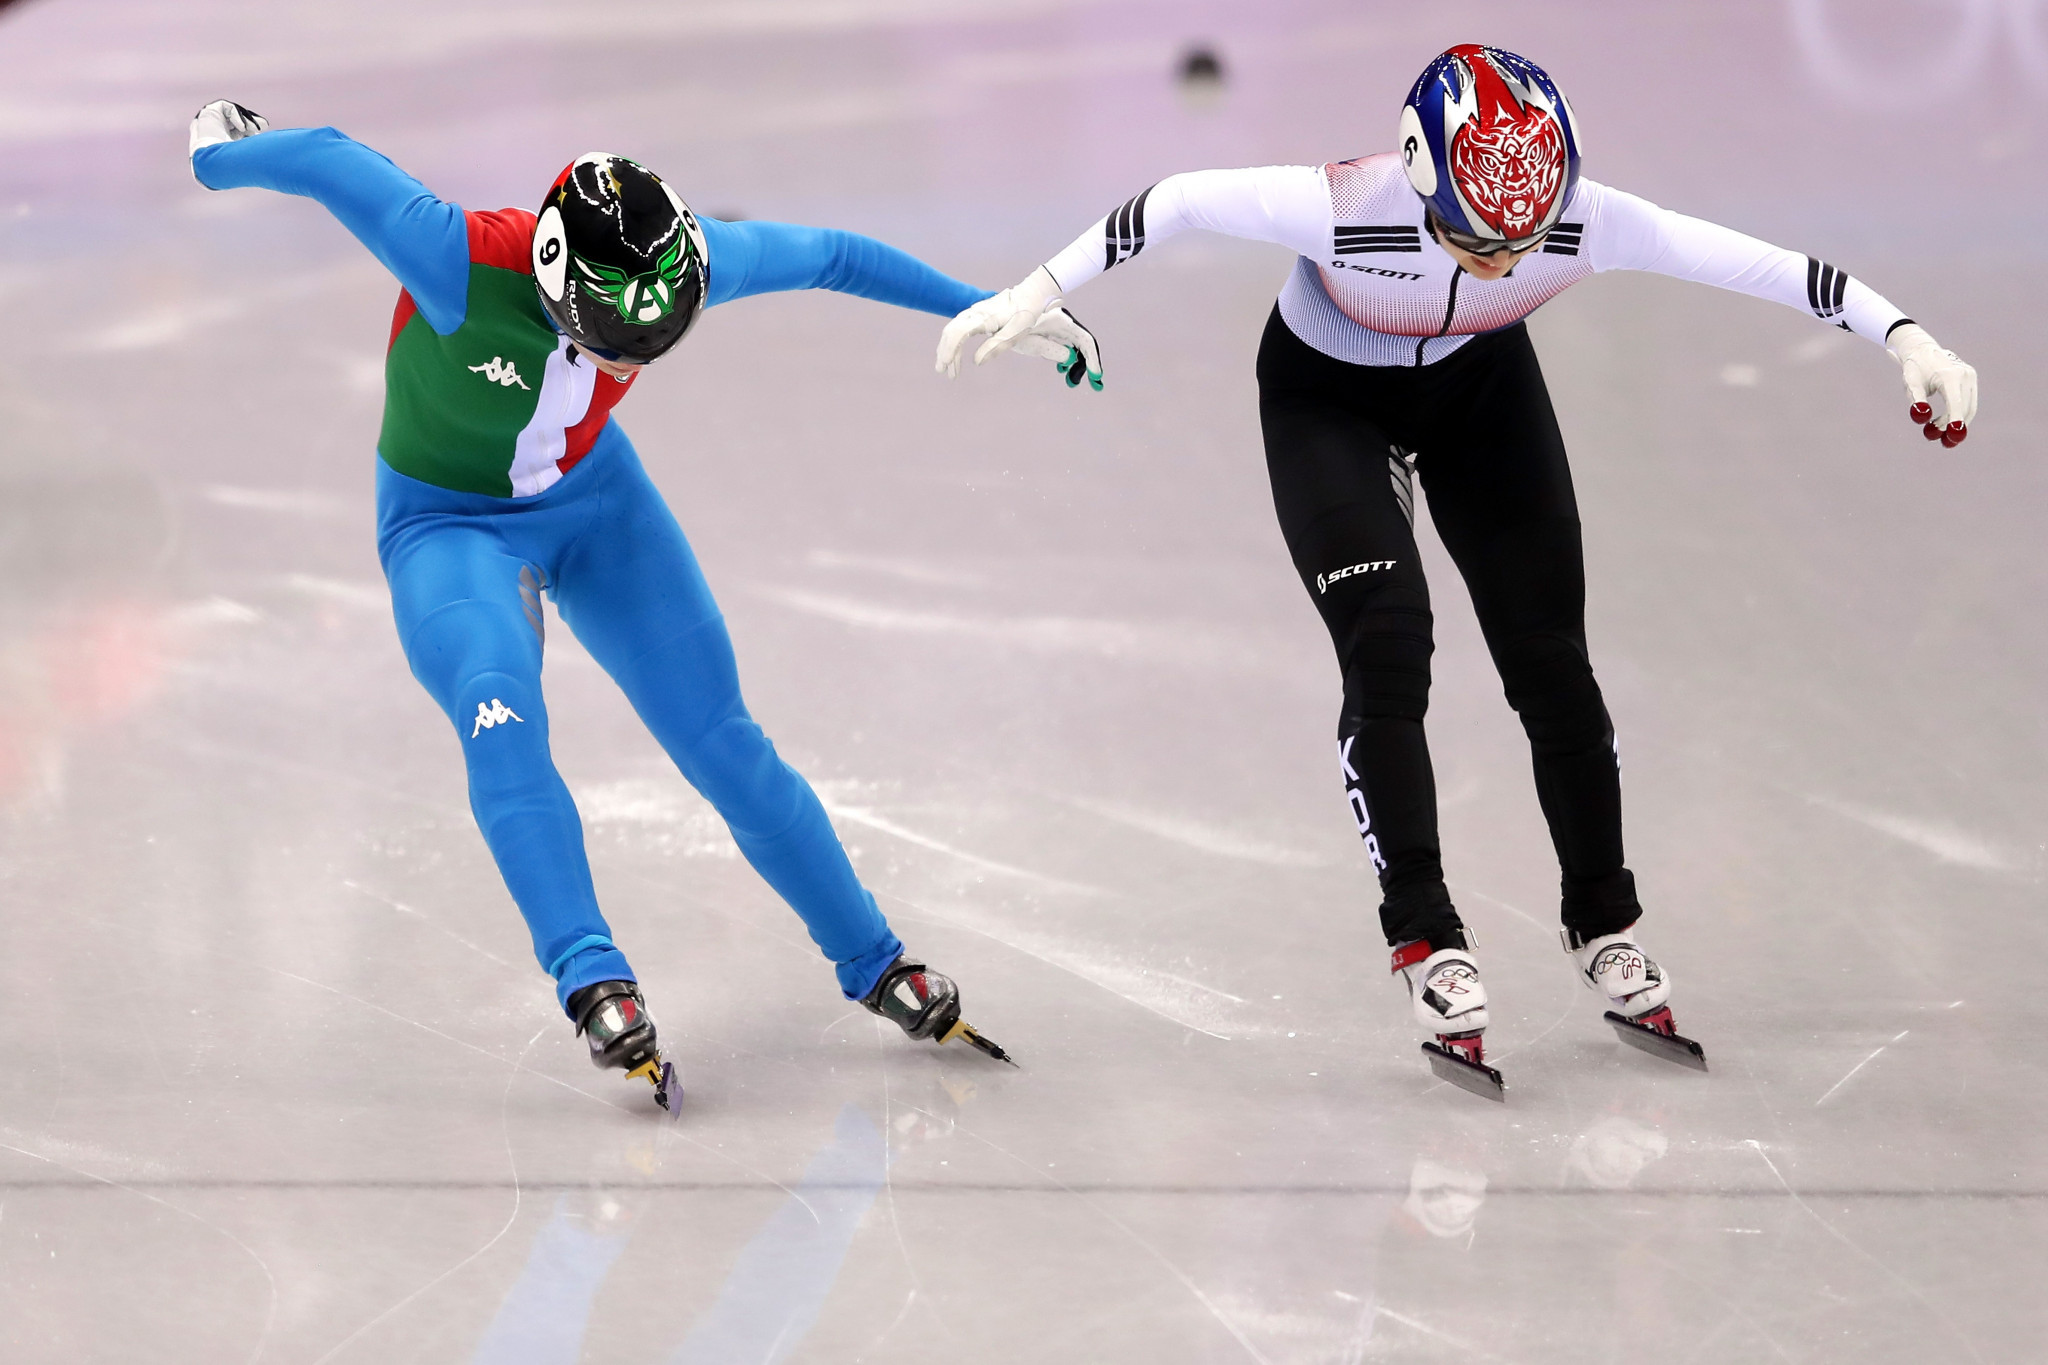 Arianna Fontana went over the line just ahead of South Korea's Choi Minjeong, who was then penalised for impeding and lost out on the silver medal ©Getty Images